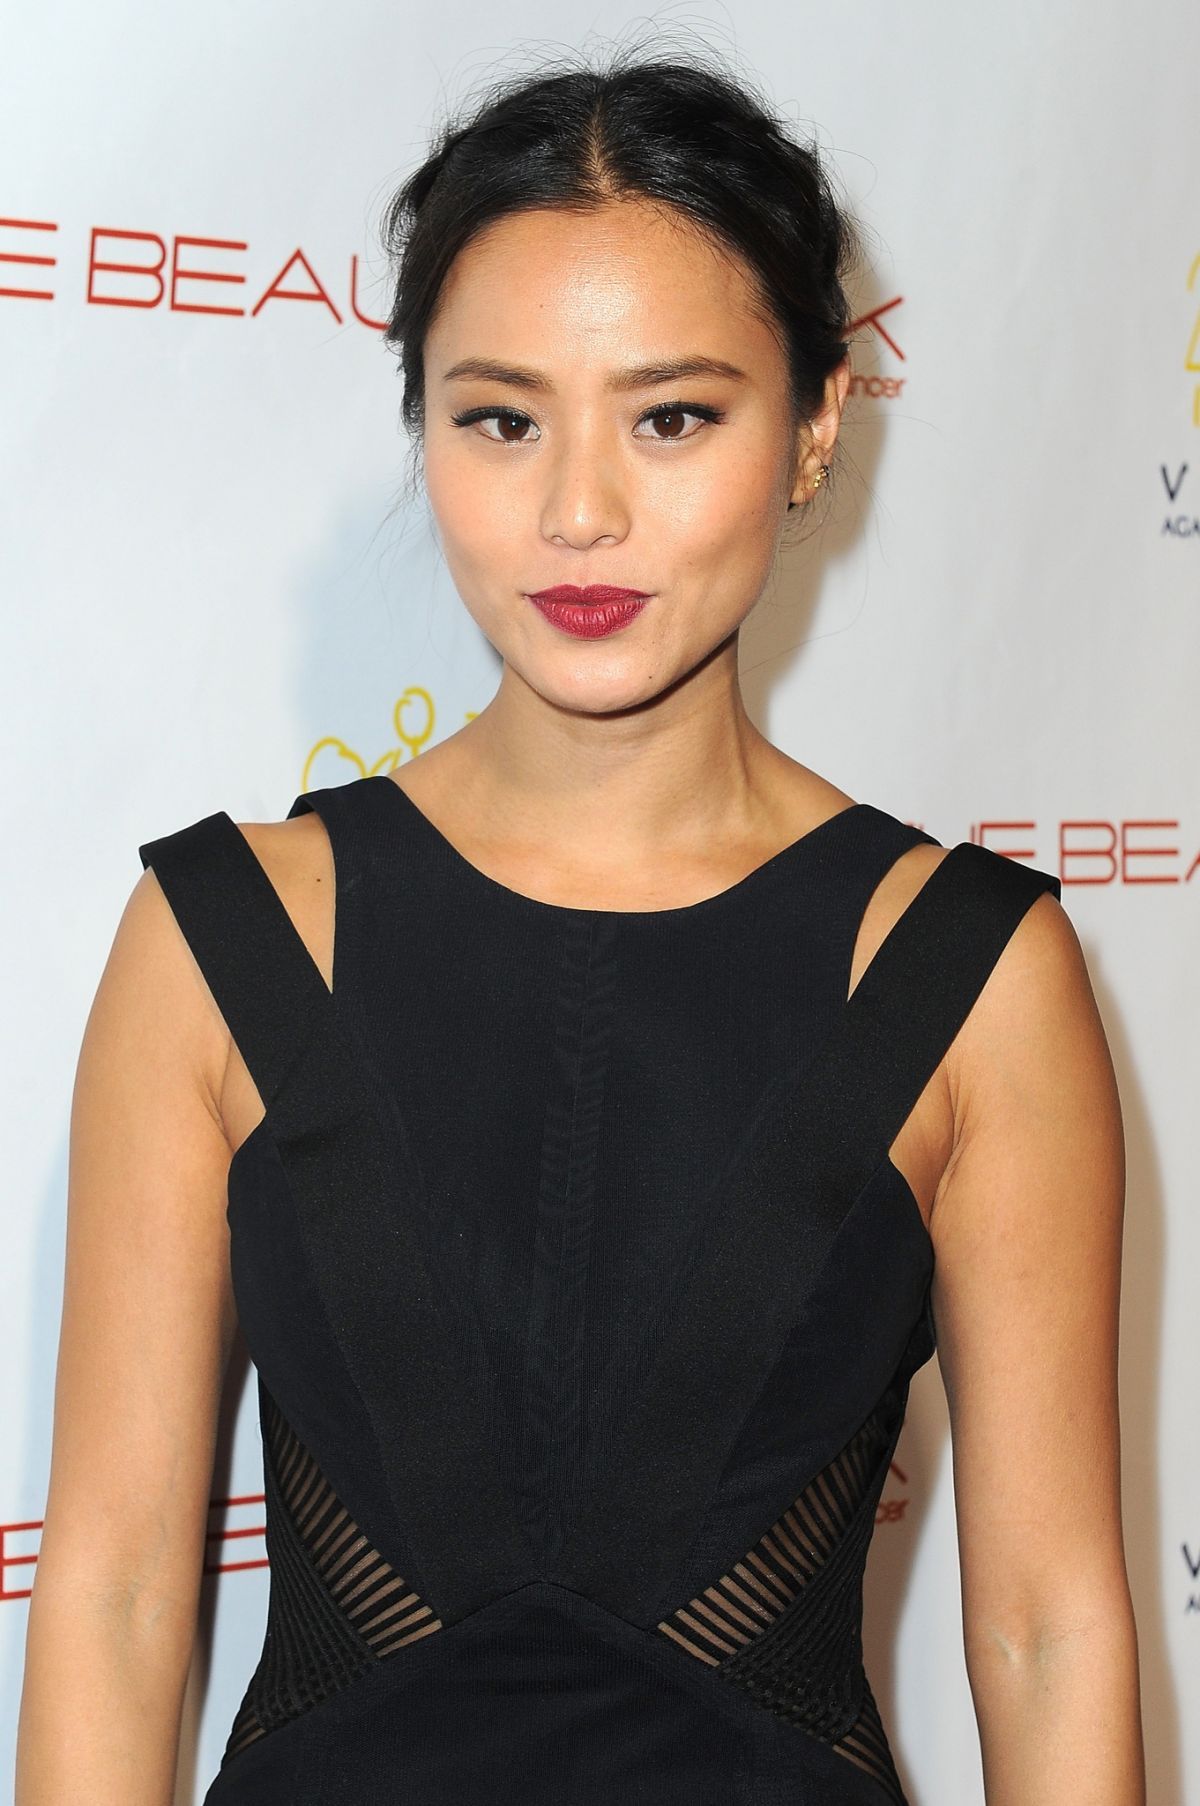 Jamie Chung At The Beauty Book For Brain Cancer Edition2 Launch Party In Los Angeles 12032015 